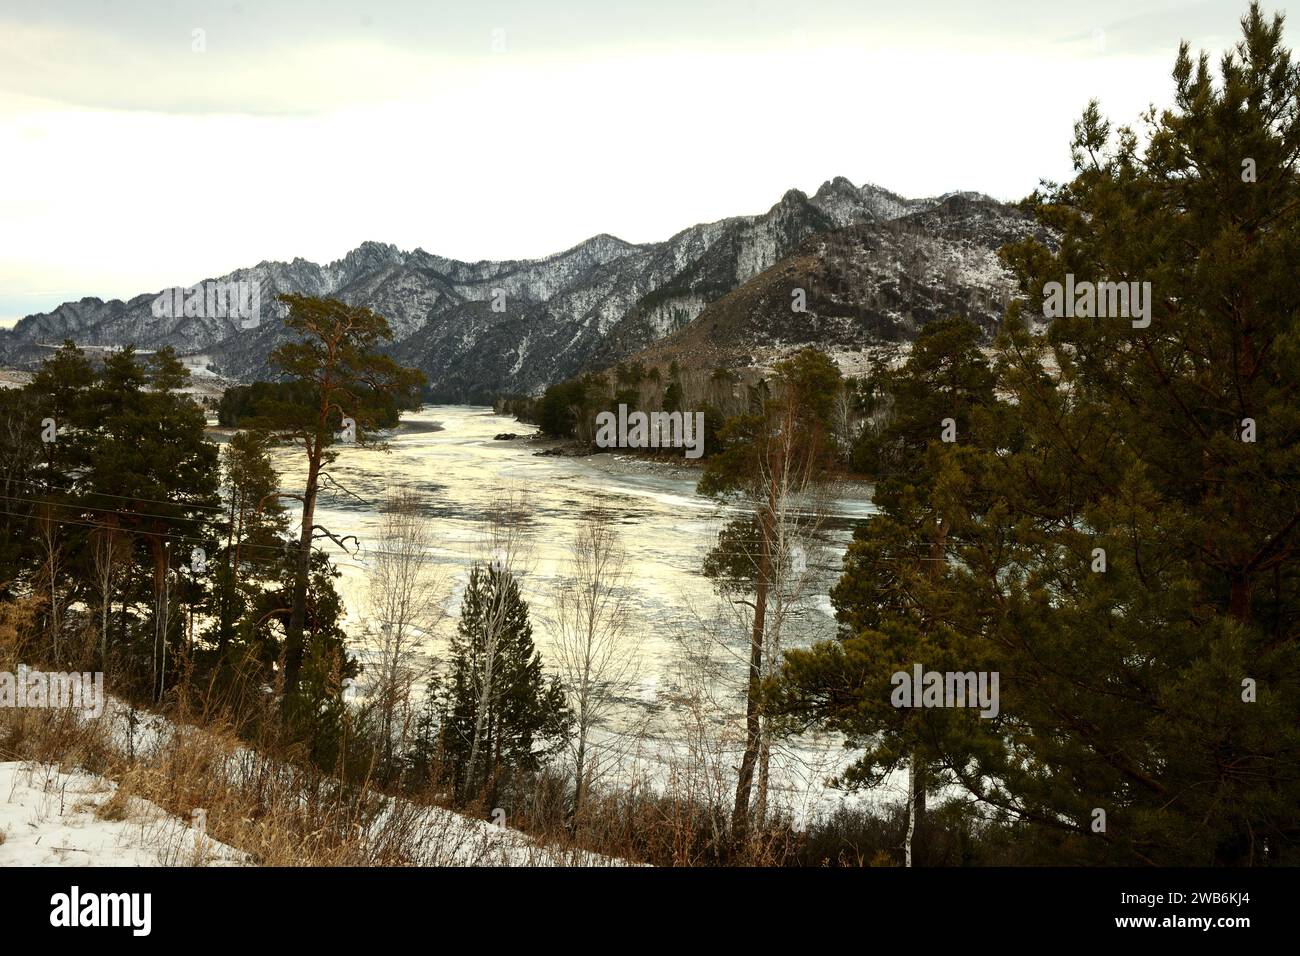 A look through the trunks of tall pine trees growing on the banks of a beautiful melted river surrounded by snow-capped mountains on a sunny winter da Stock Photo